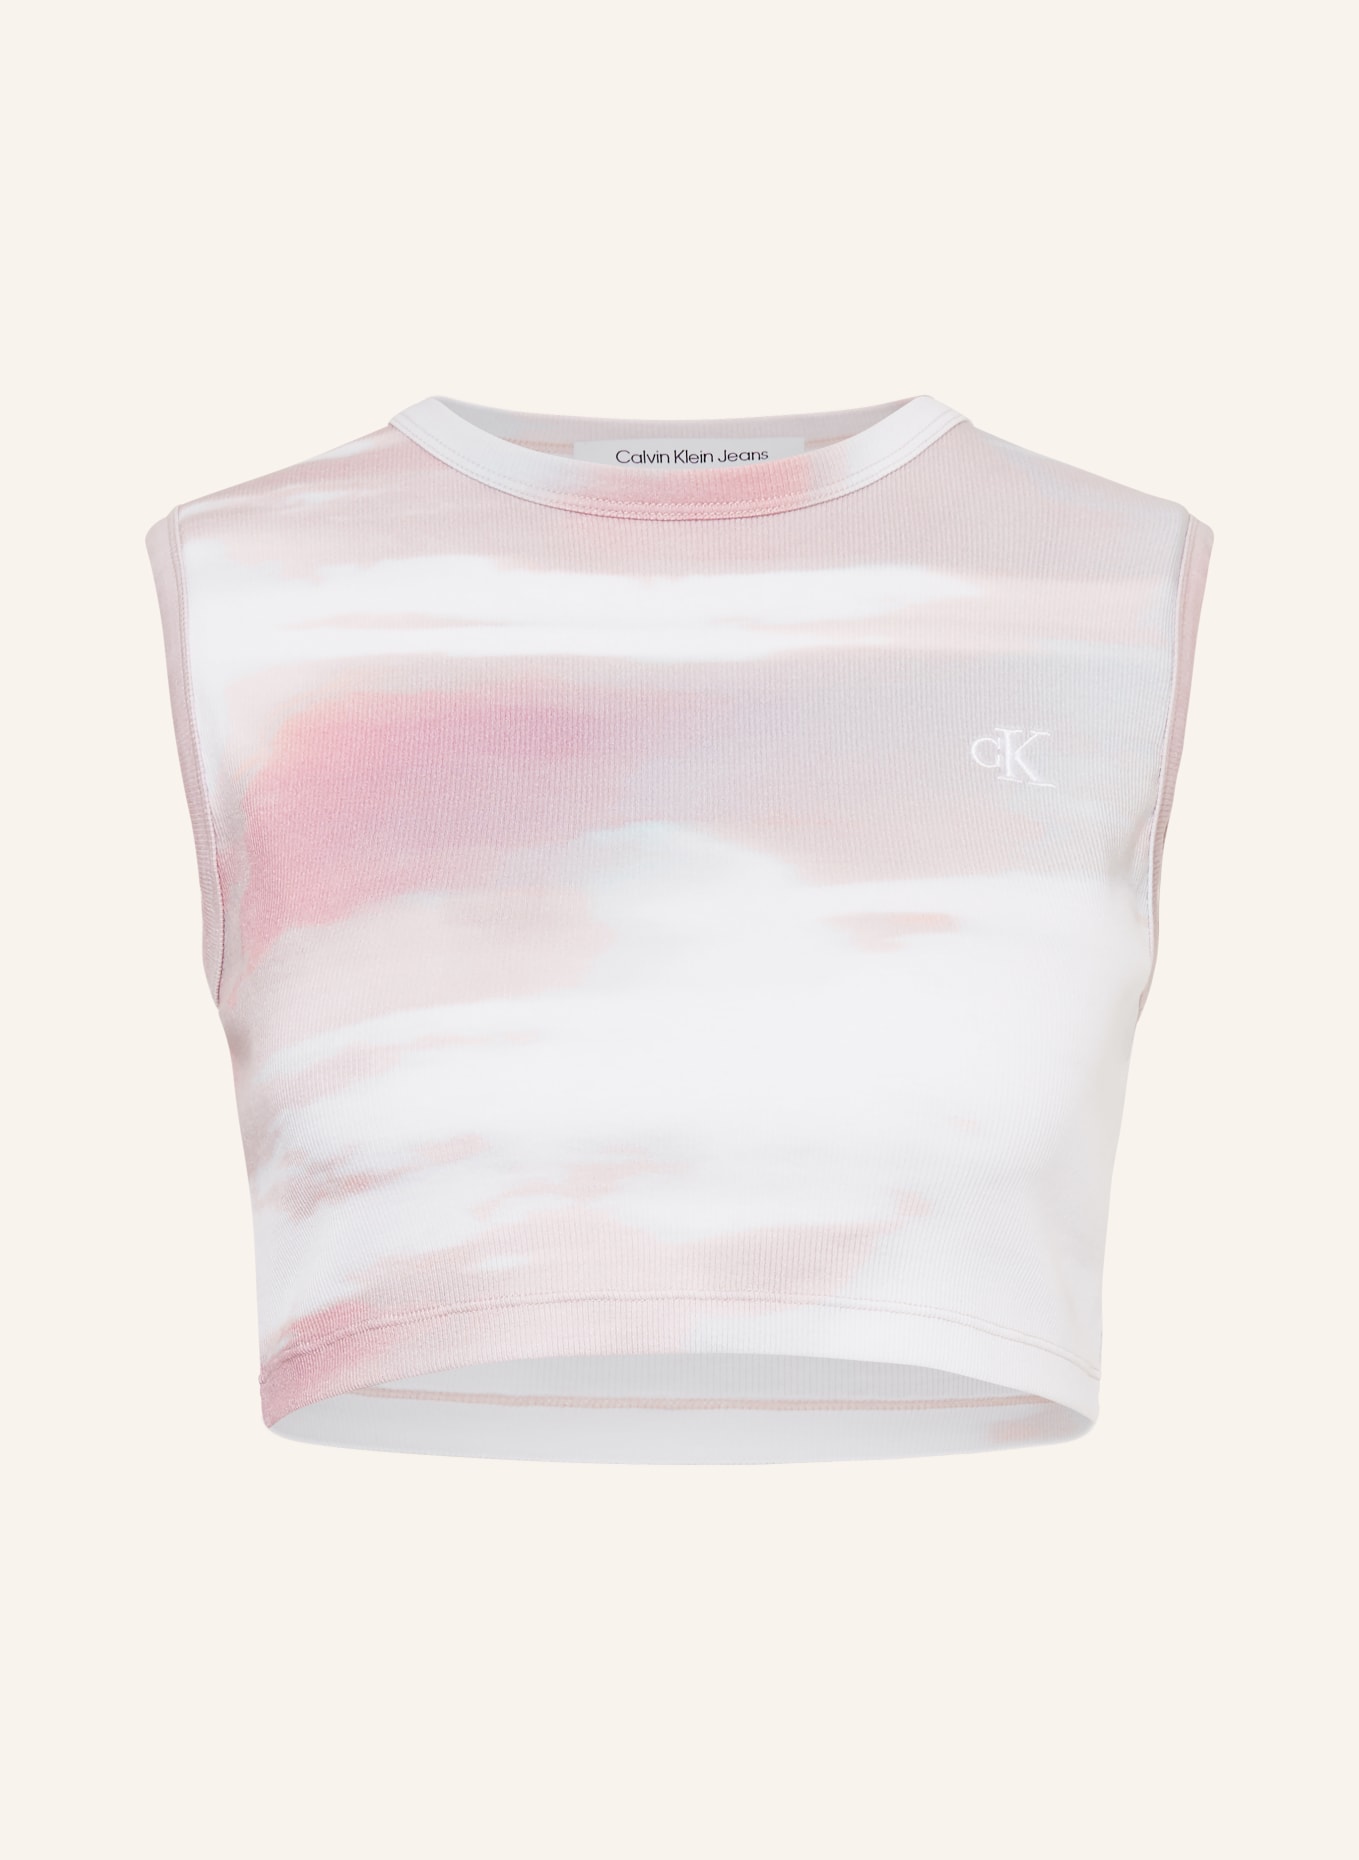 Calvin Klein Jeans Cropped top, Color: WHITE/ DUSKY PINK/ MINT (Image 1)